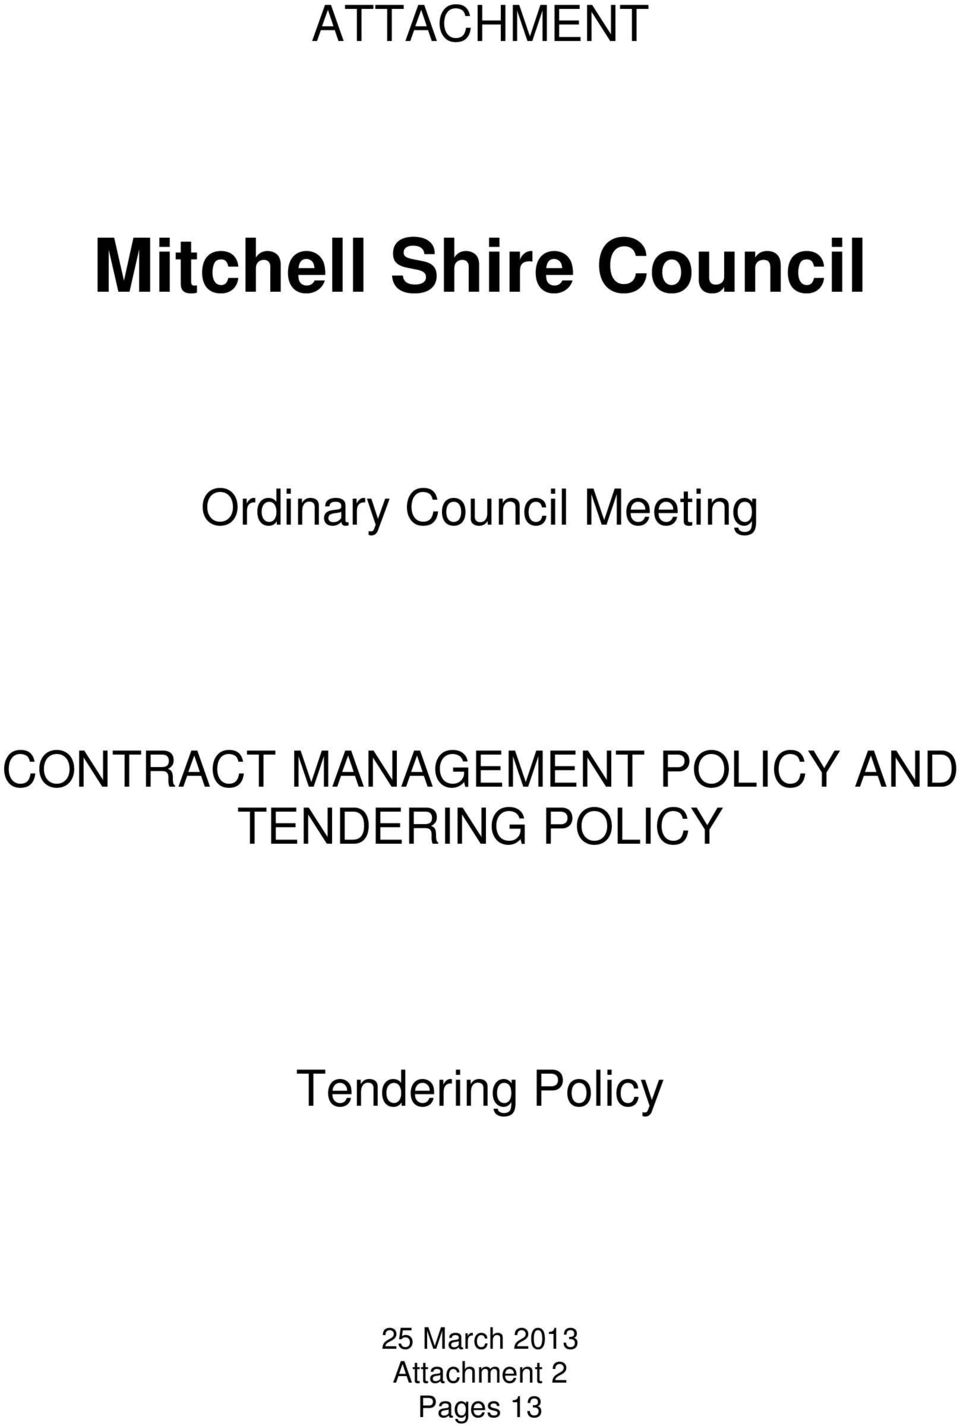 MANAGEMENT POLICY AND TENDERING POLICY